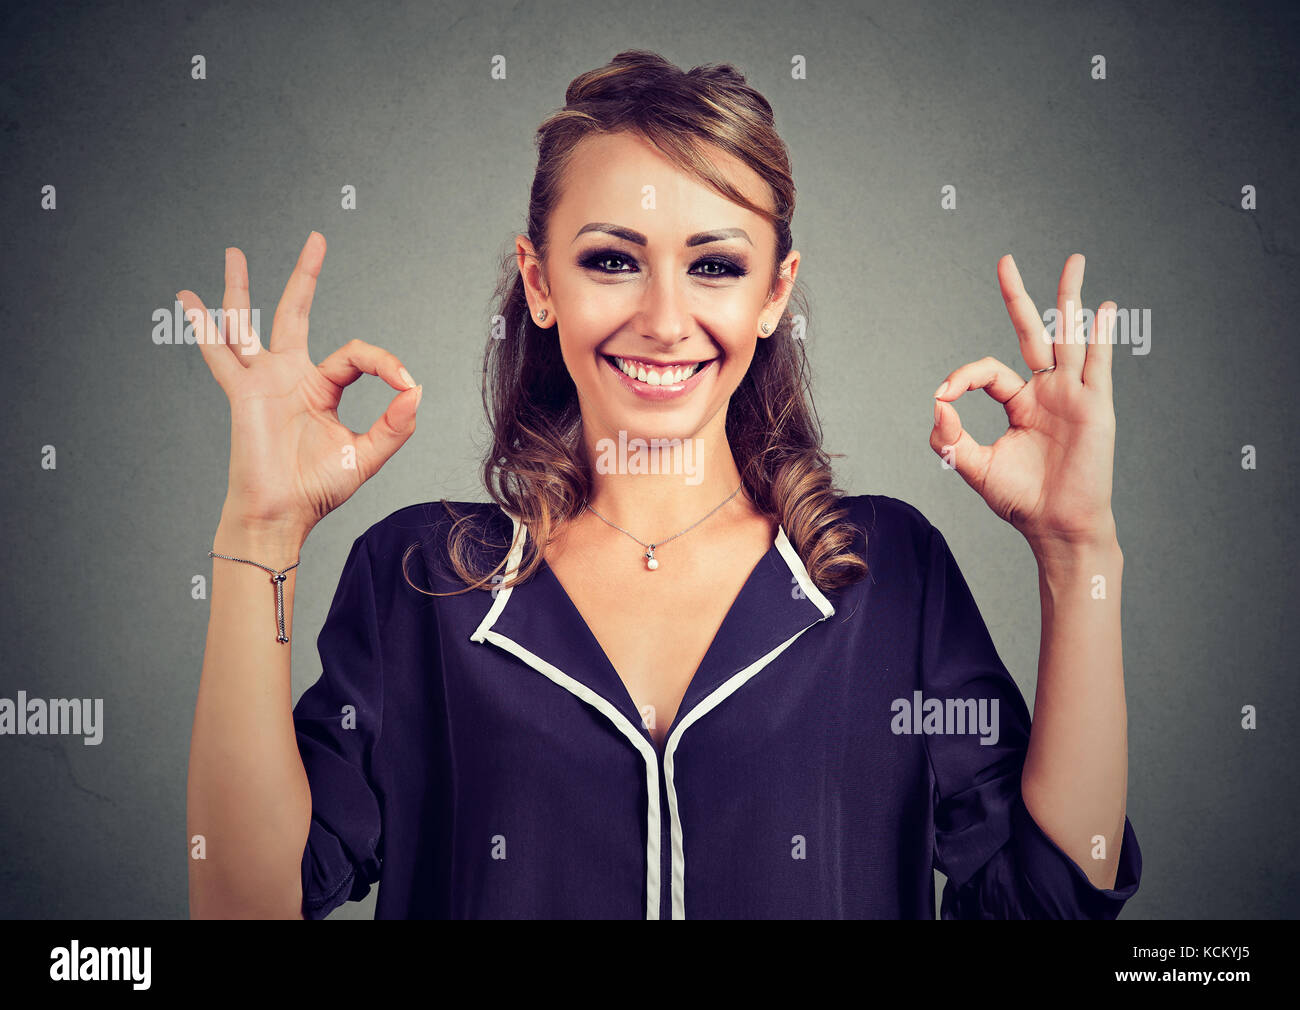 Cute playful woman showing two ok signs over gray background Stock Photo